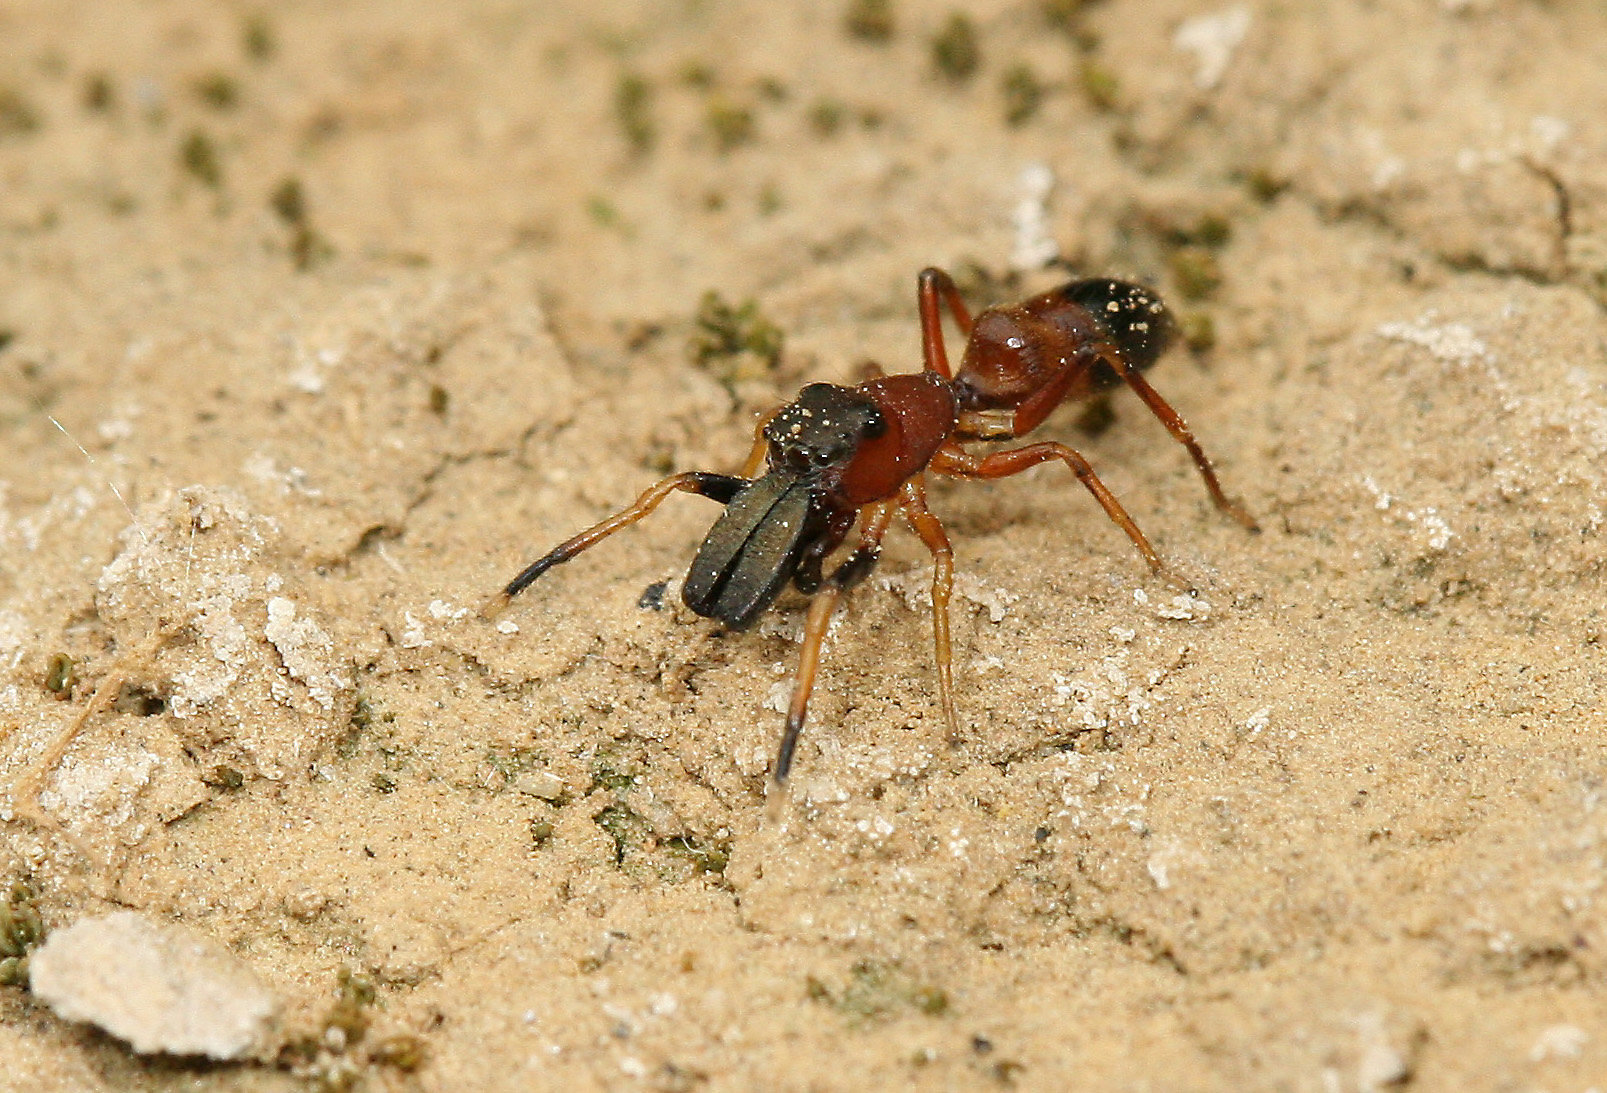 Male ant mimic jumping spider